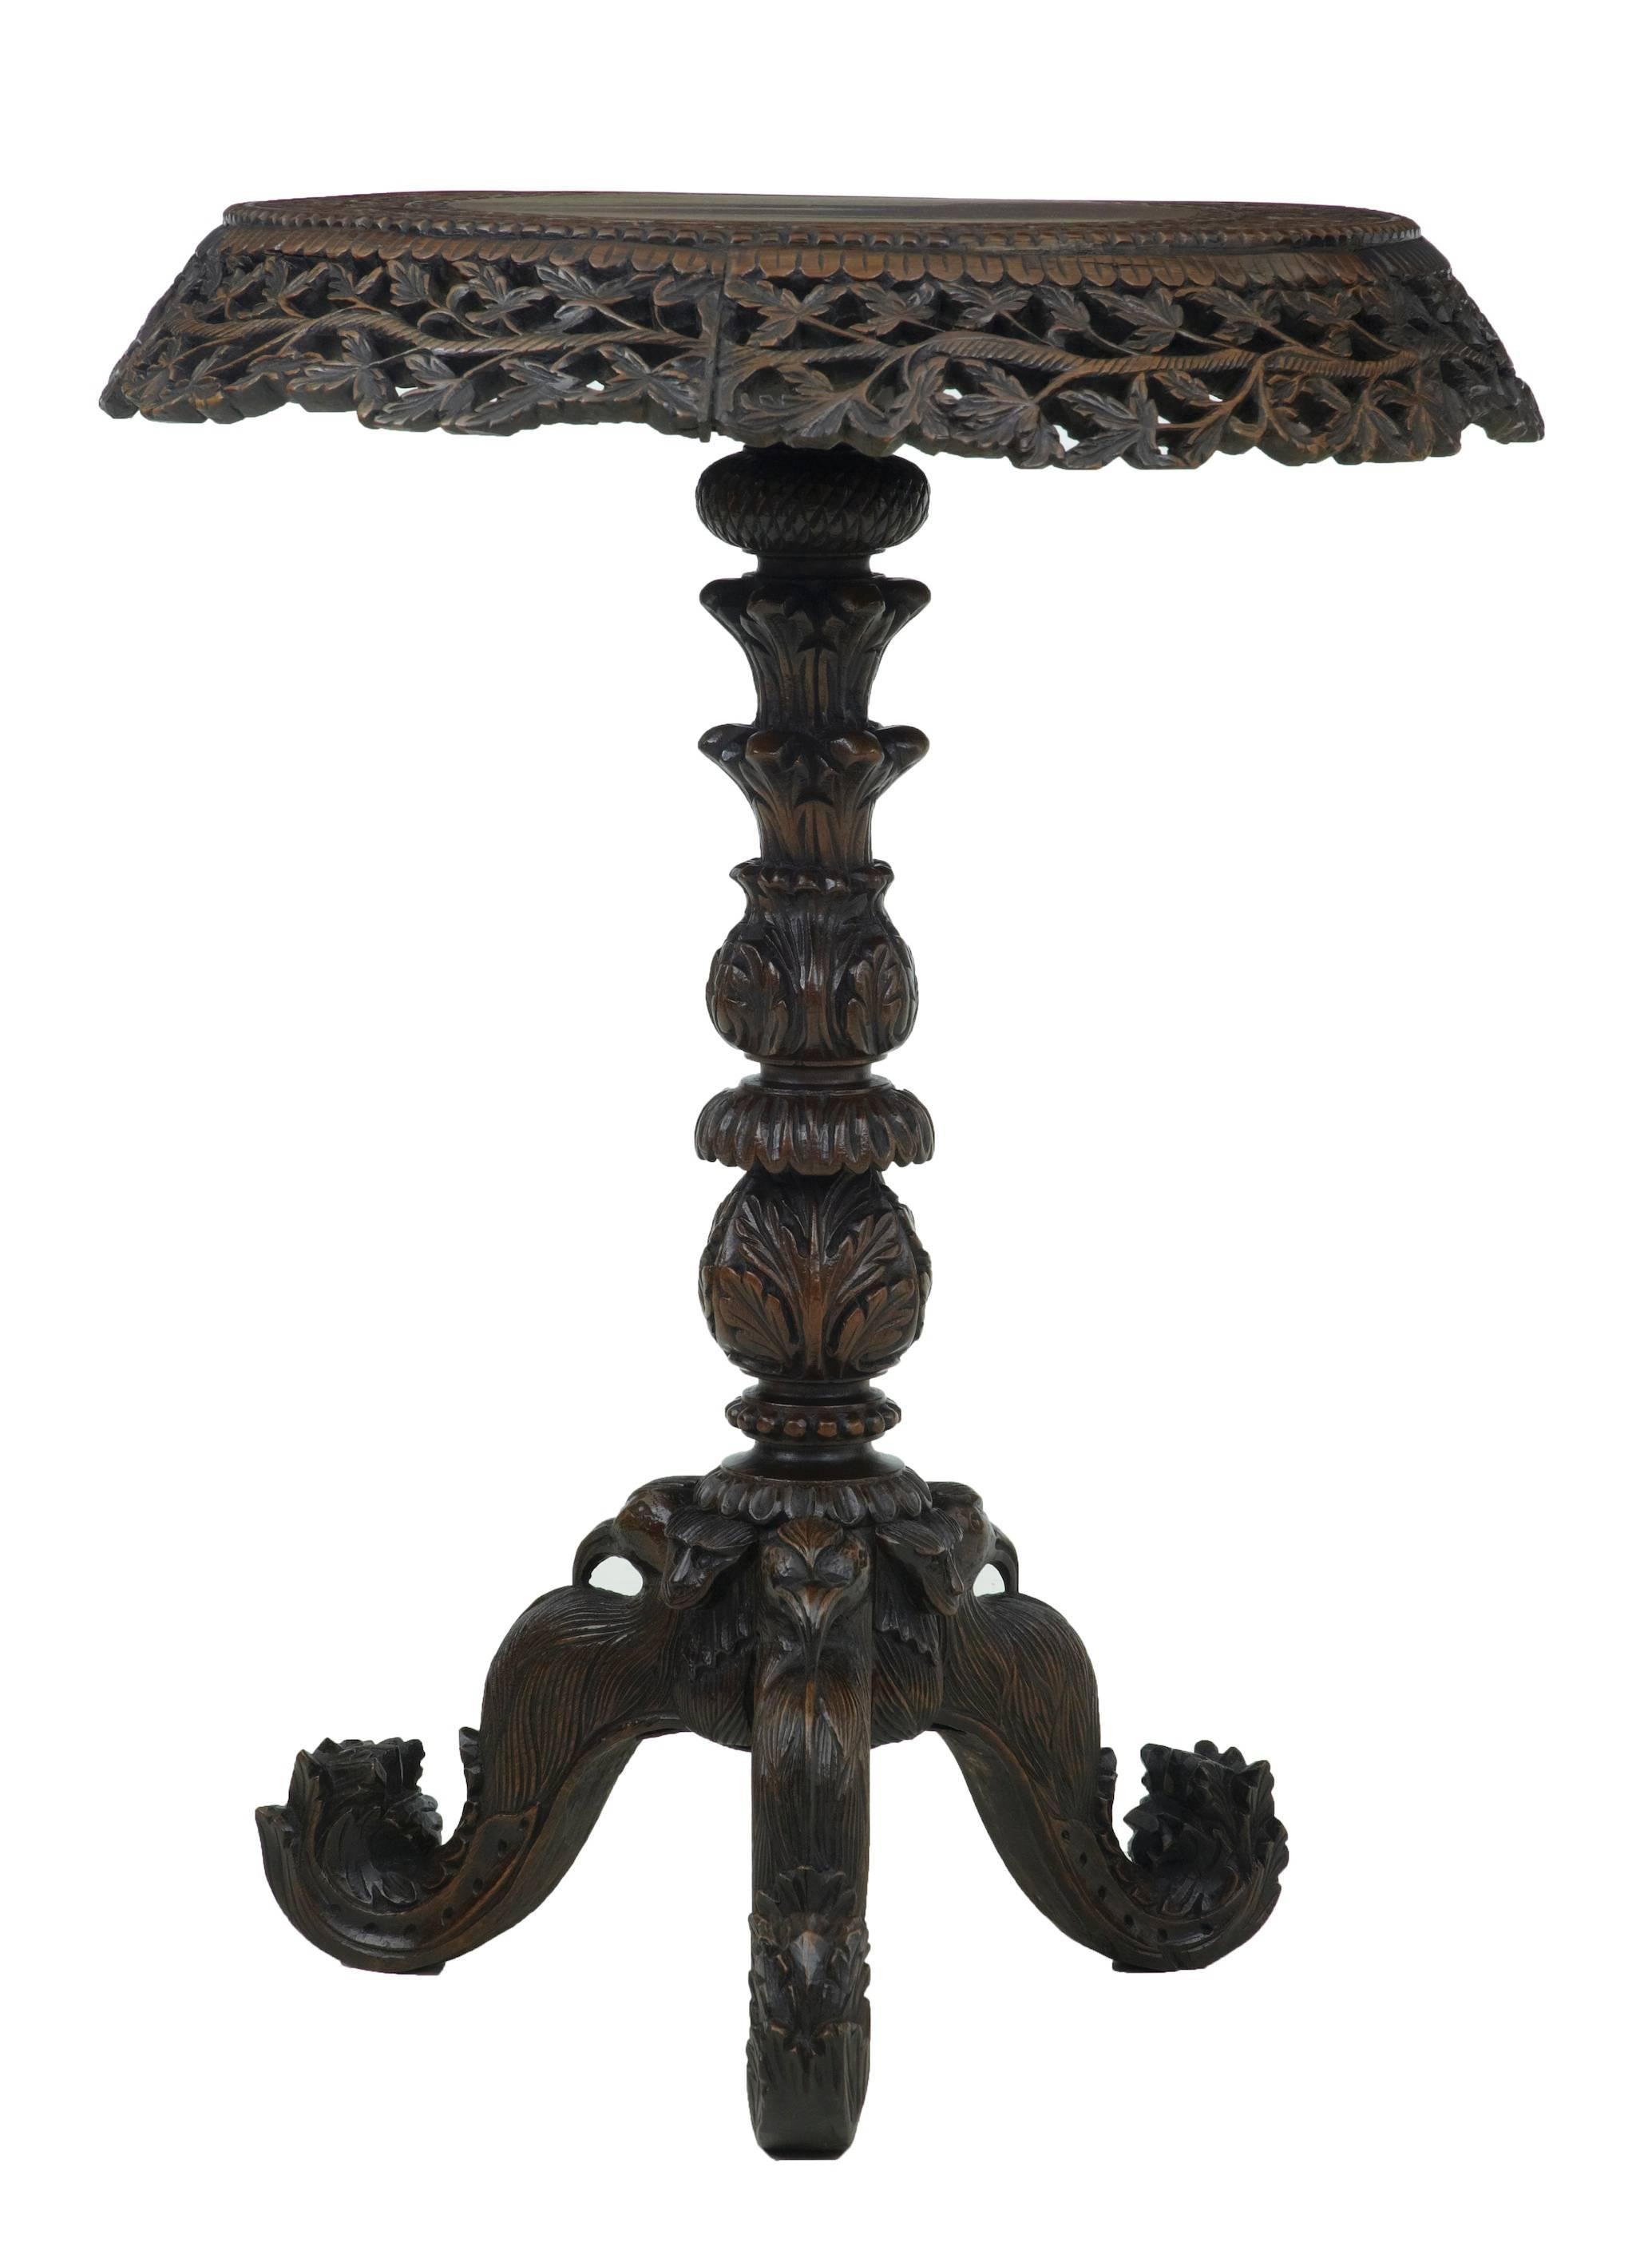 Anglo-Indian 19th Century Carved Hardwood Ceylonese Flip-Top Tripod Table